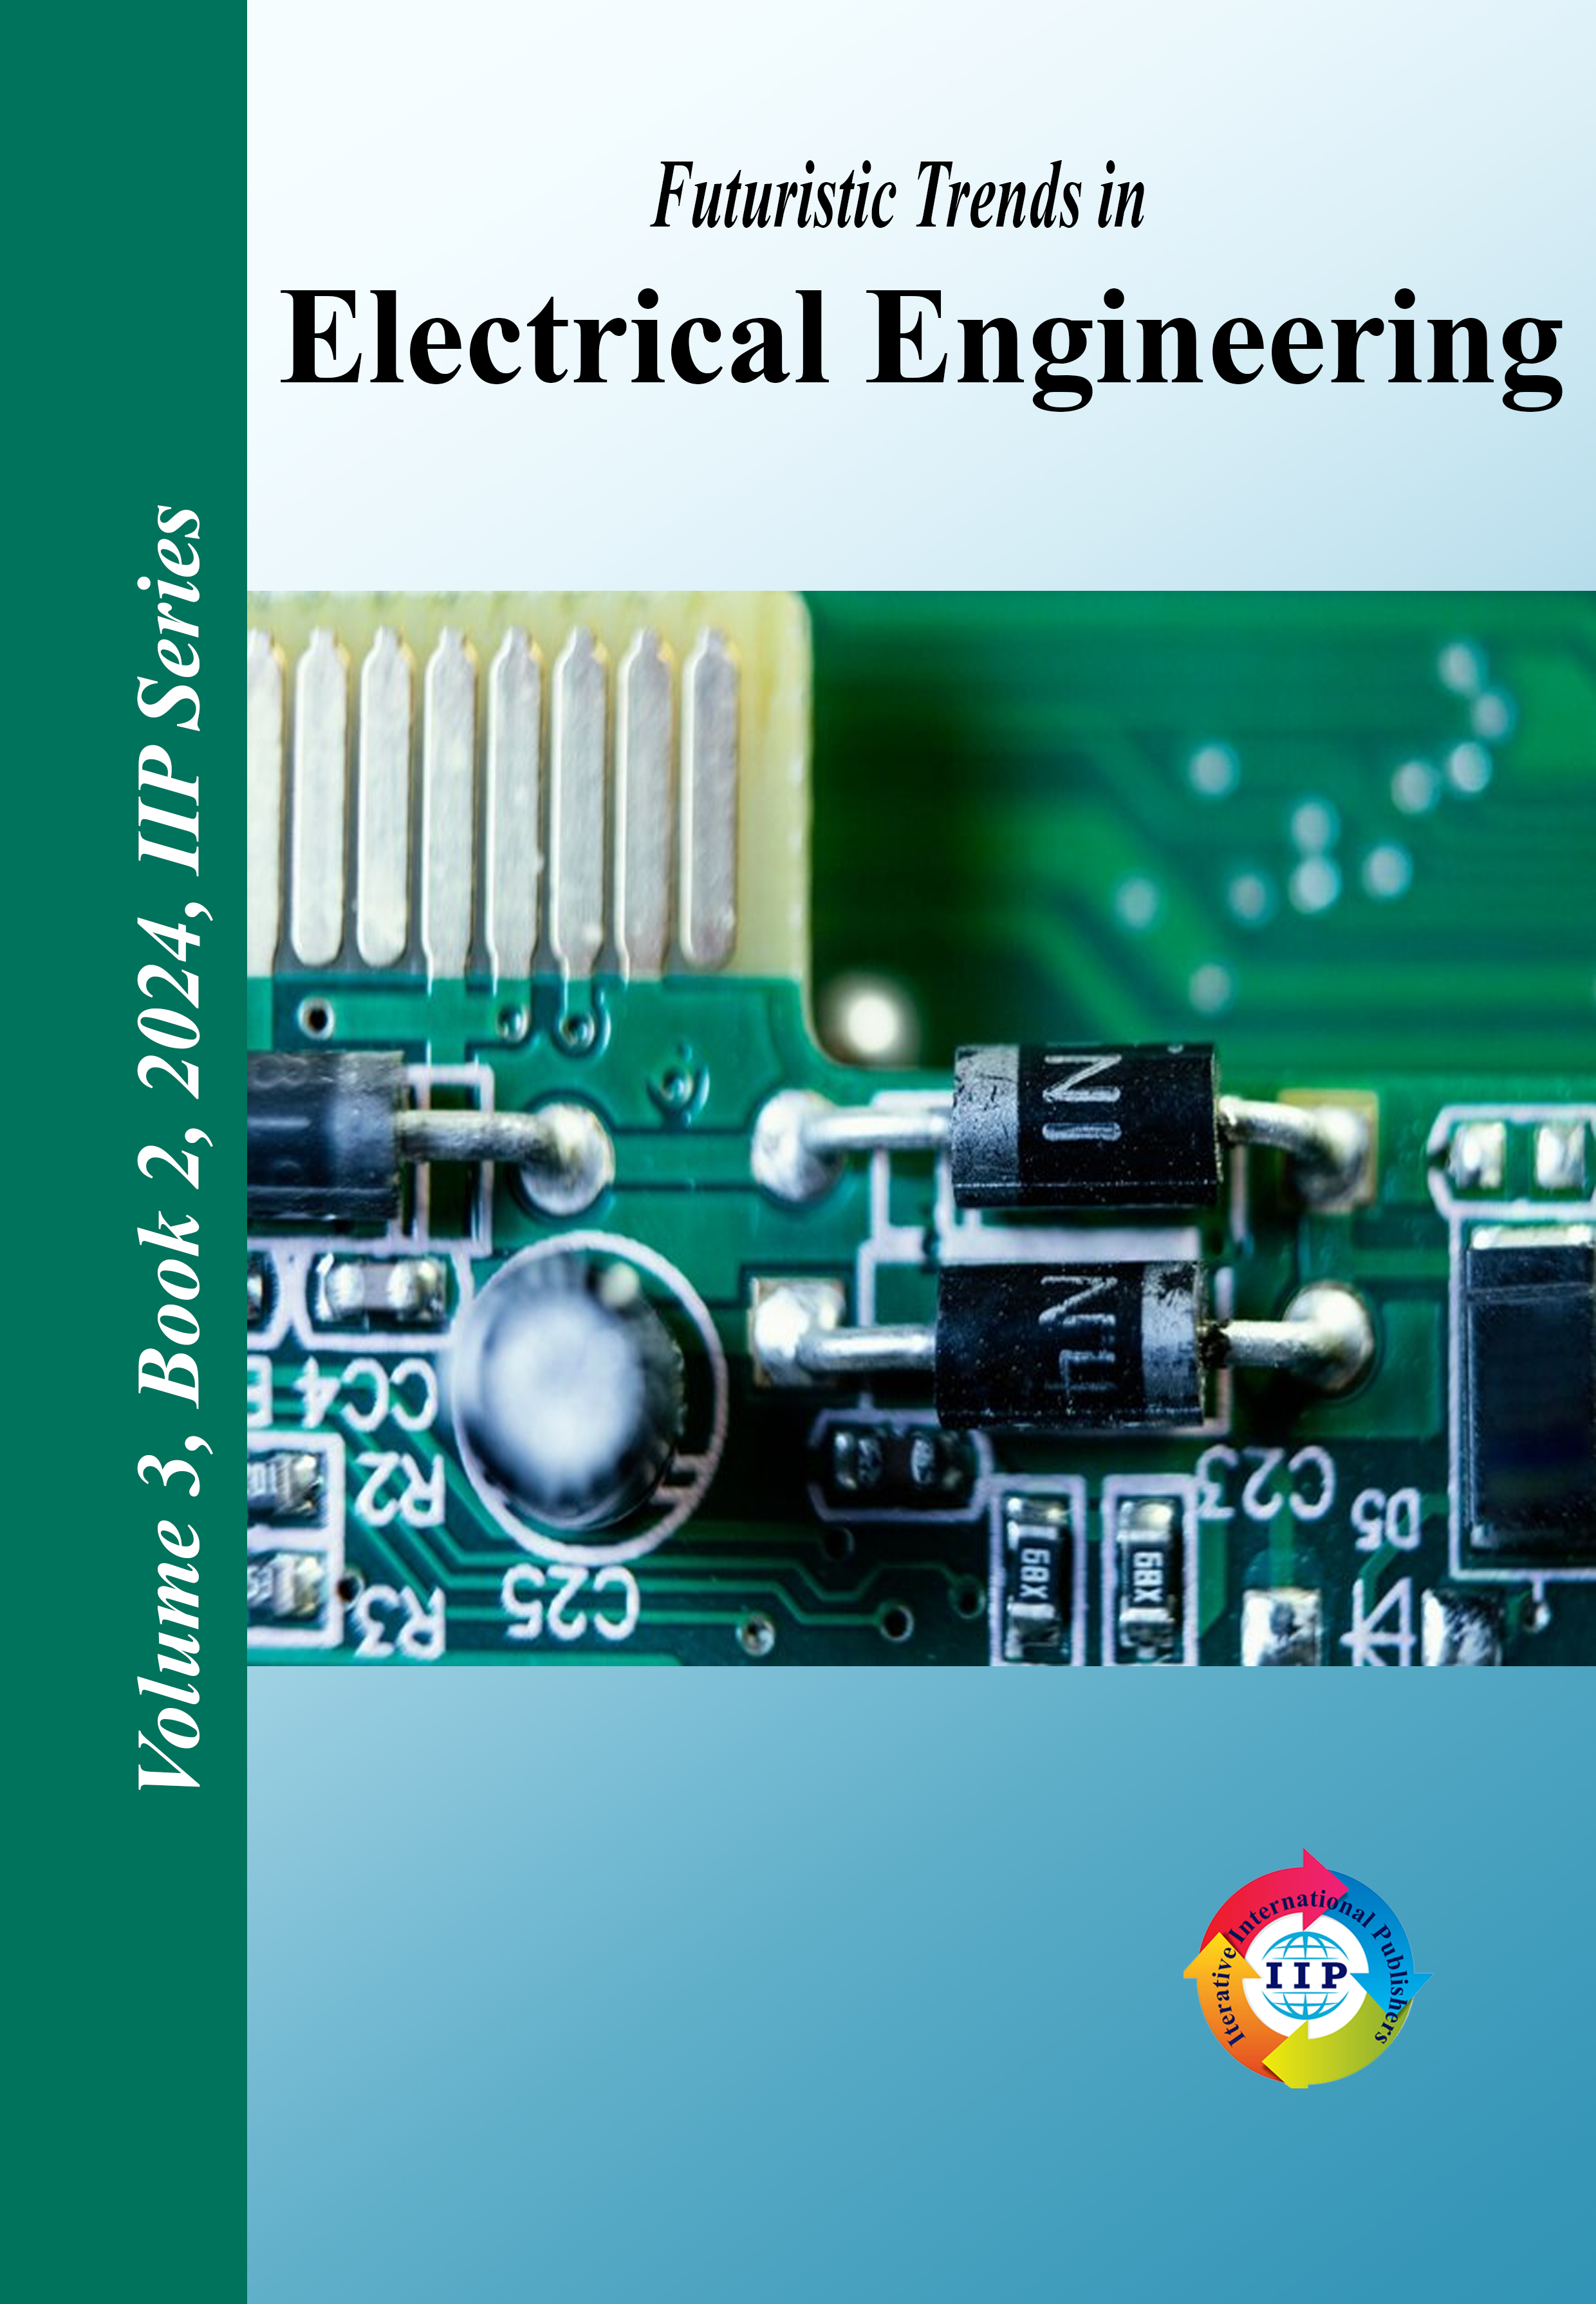 Futuristic Trends in Electrical Engineering Volume 3 Book 2